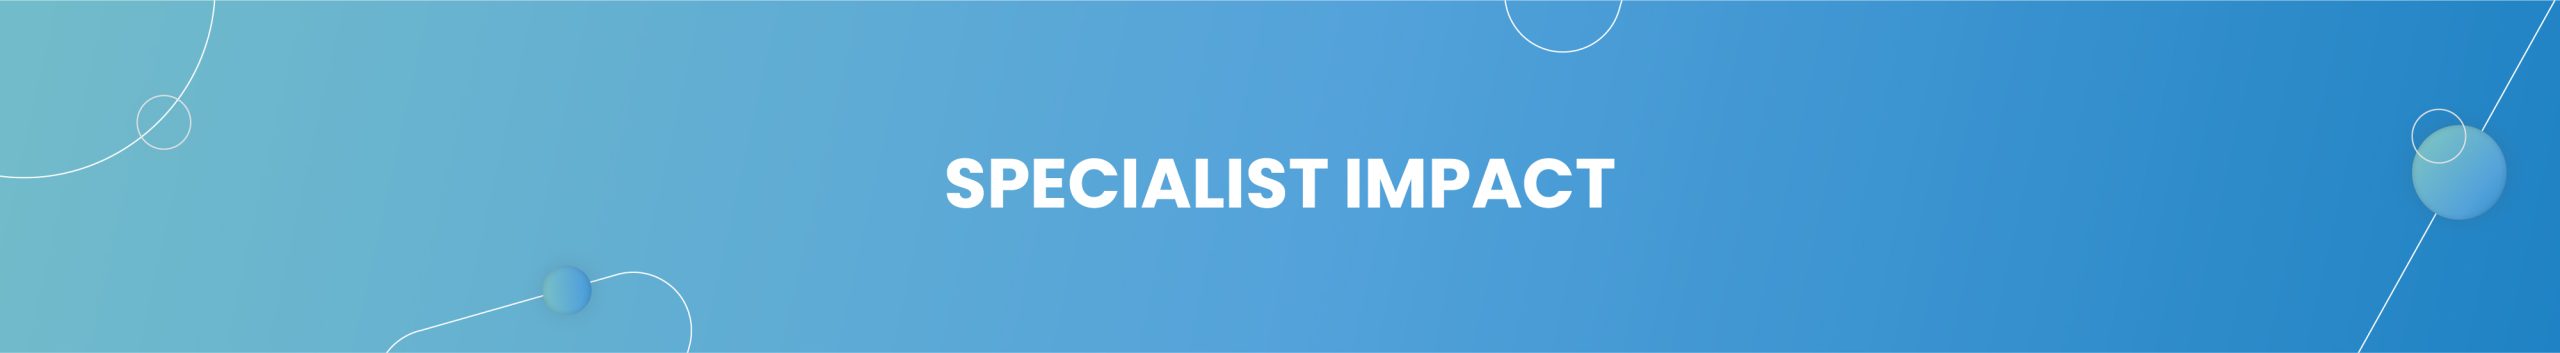 Specialist Impact banner